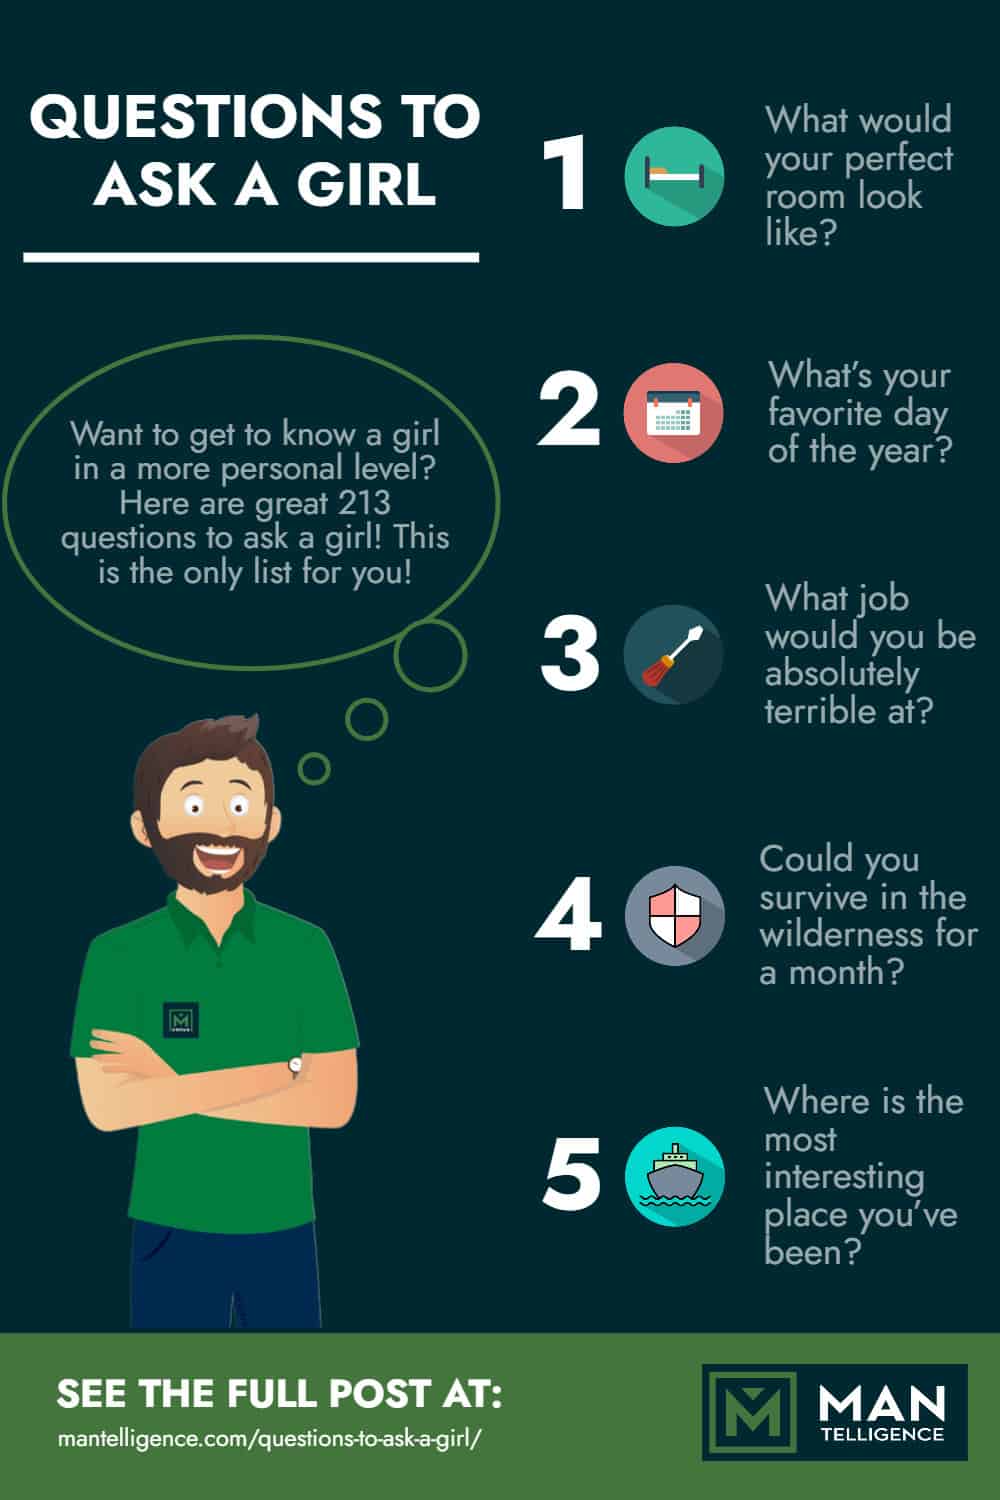 Questions to ask a girl - Infographic